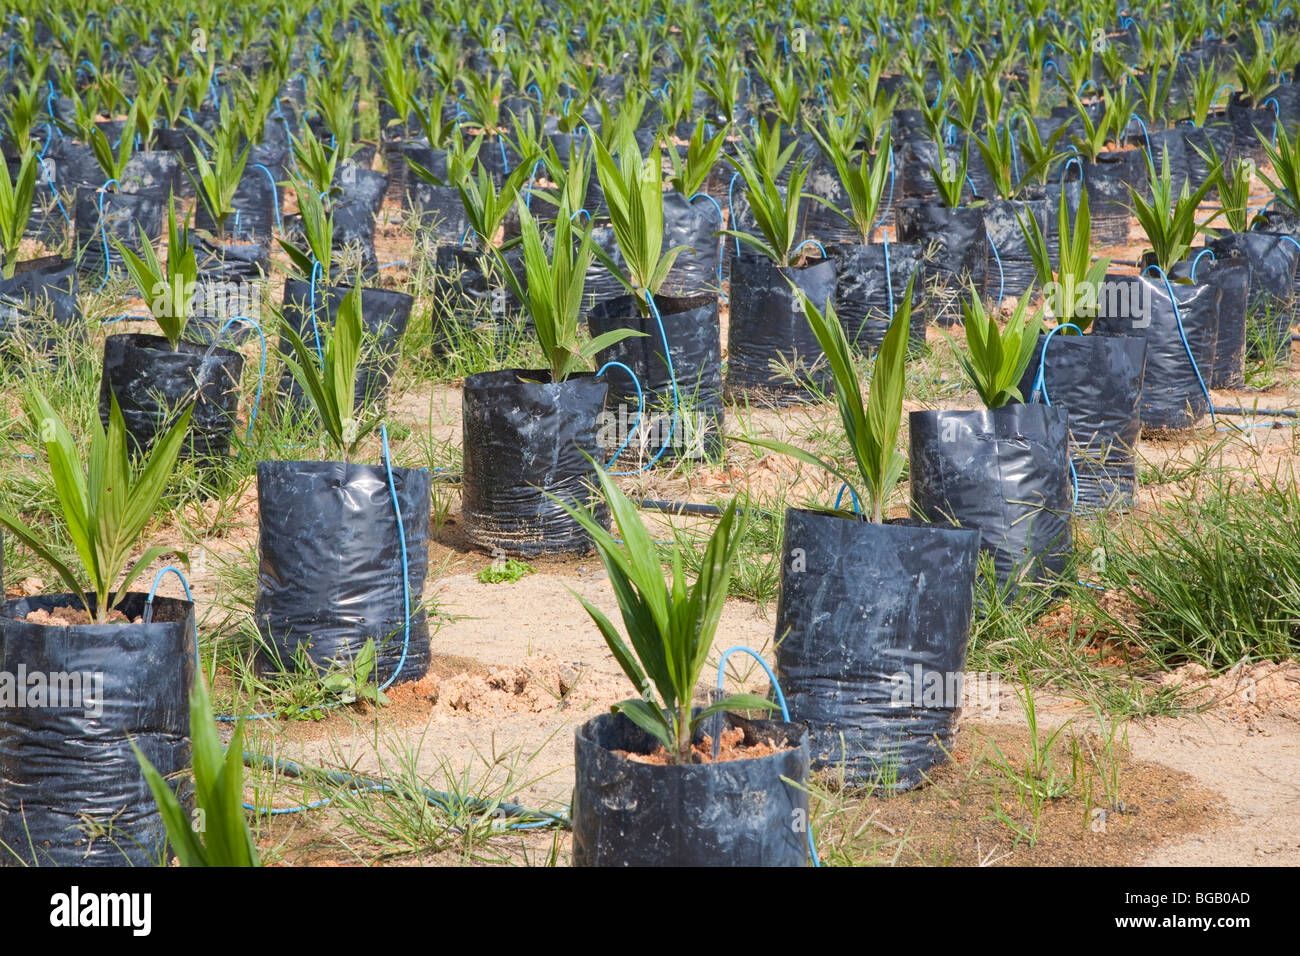 On-site oil palm tree nursery using drip irrigation to water the potted